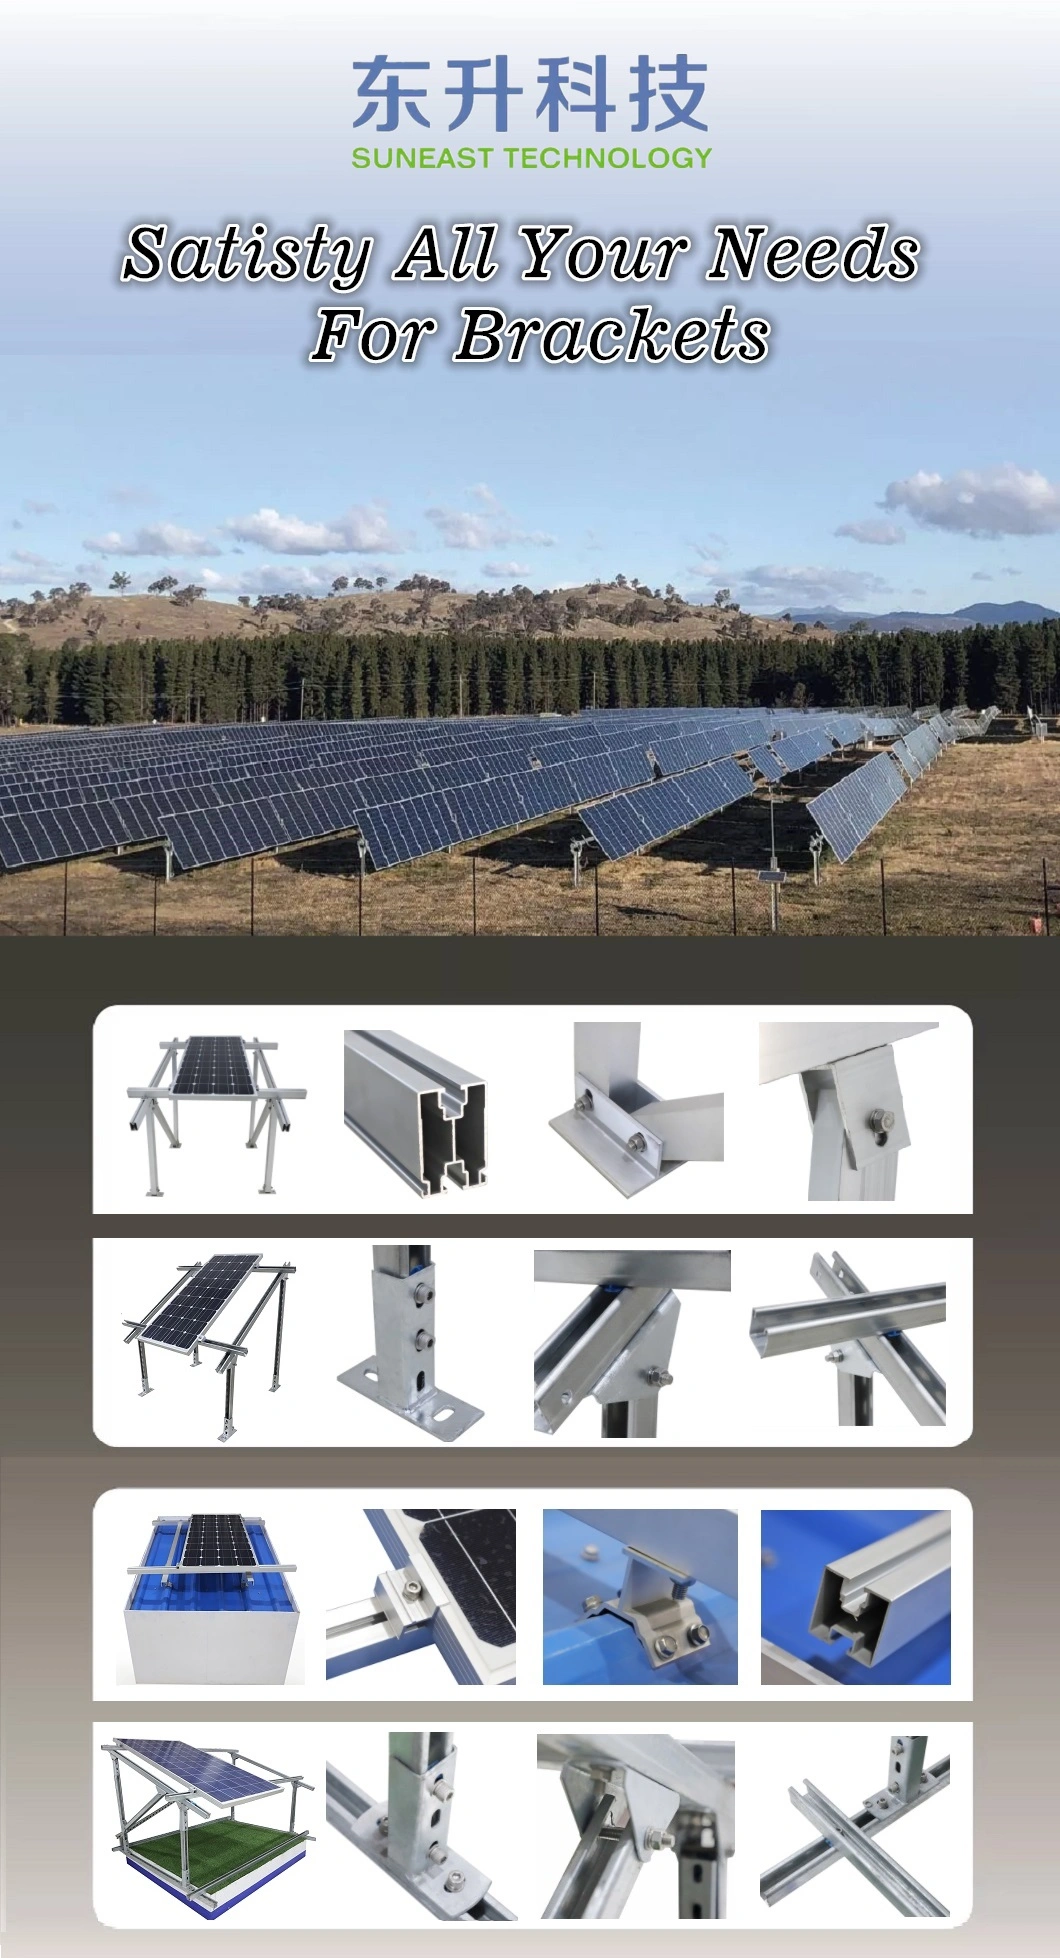 Solar Panel Support System Tile Roof Solar Panel Support Installation System